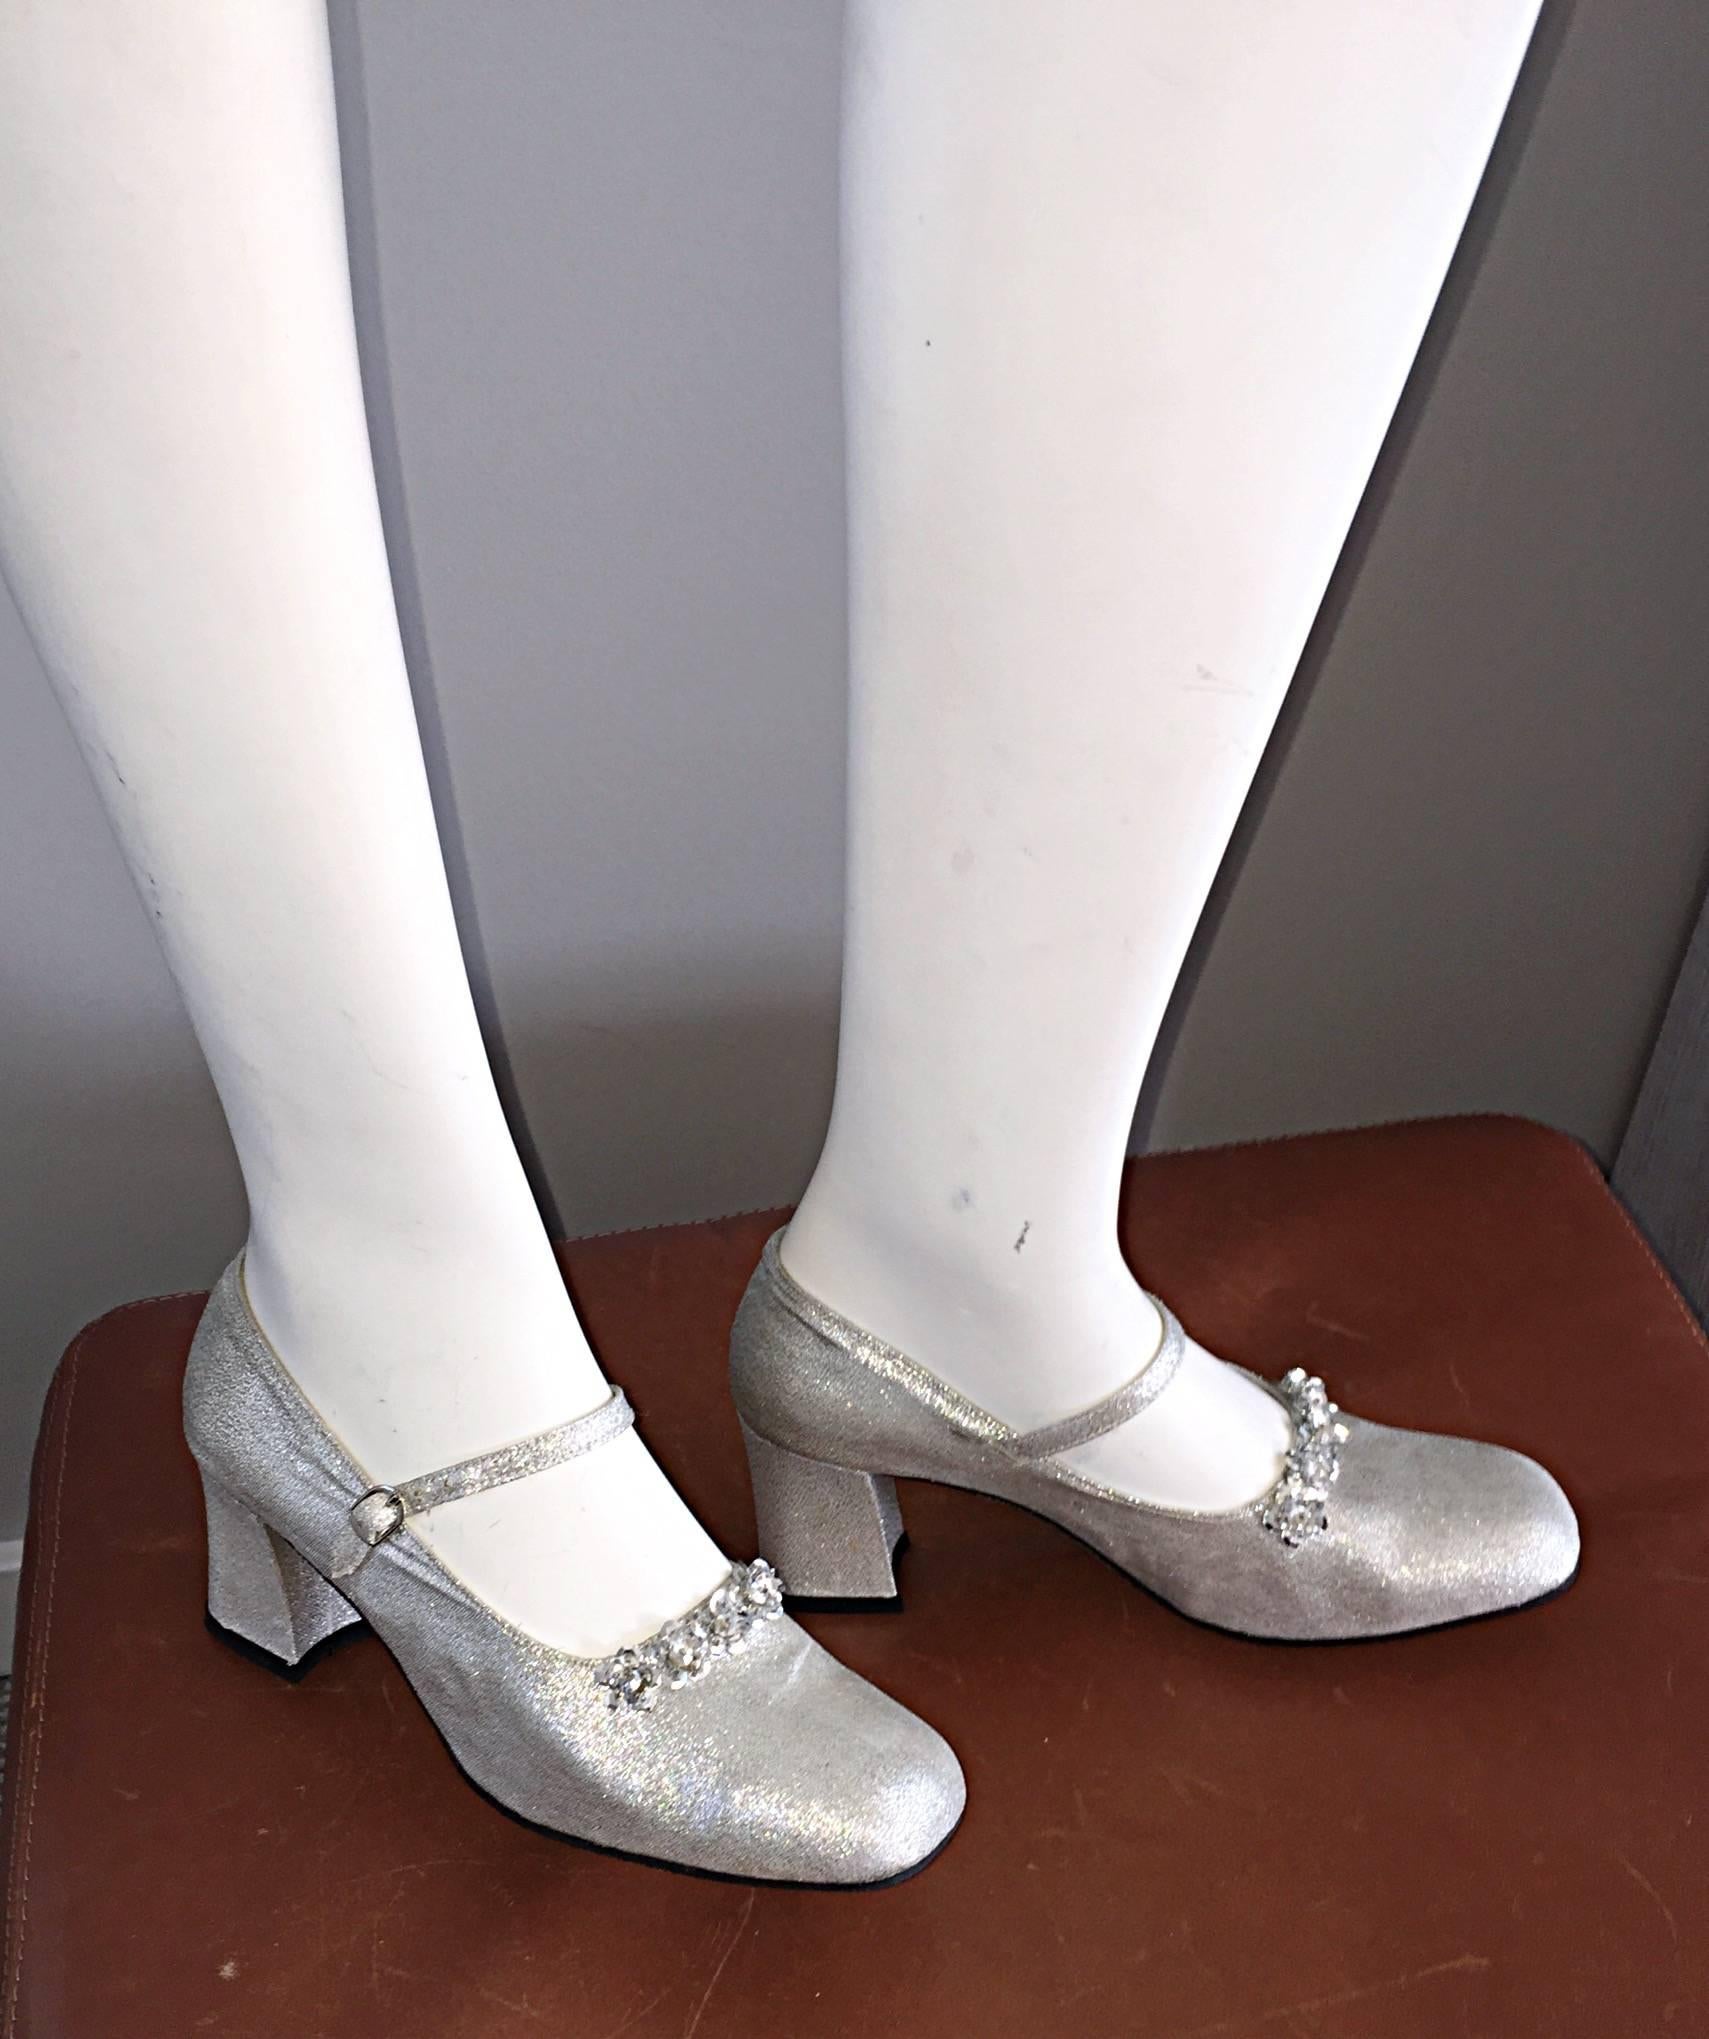 Brand new vintage 1960s babydoll pumps! Silver metallic, with cute sequins shaped into flowers on the front. Adjustable ankle straps. A classic pair of maryjanes, with a mod twist! In great, unworn condition. Marked Size US 7 (runs true to size)